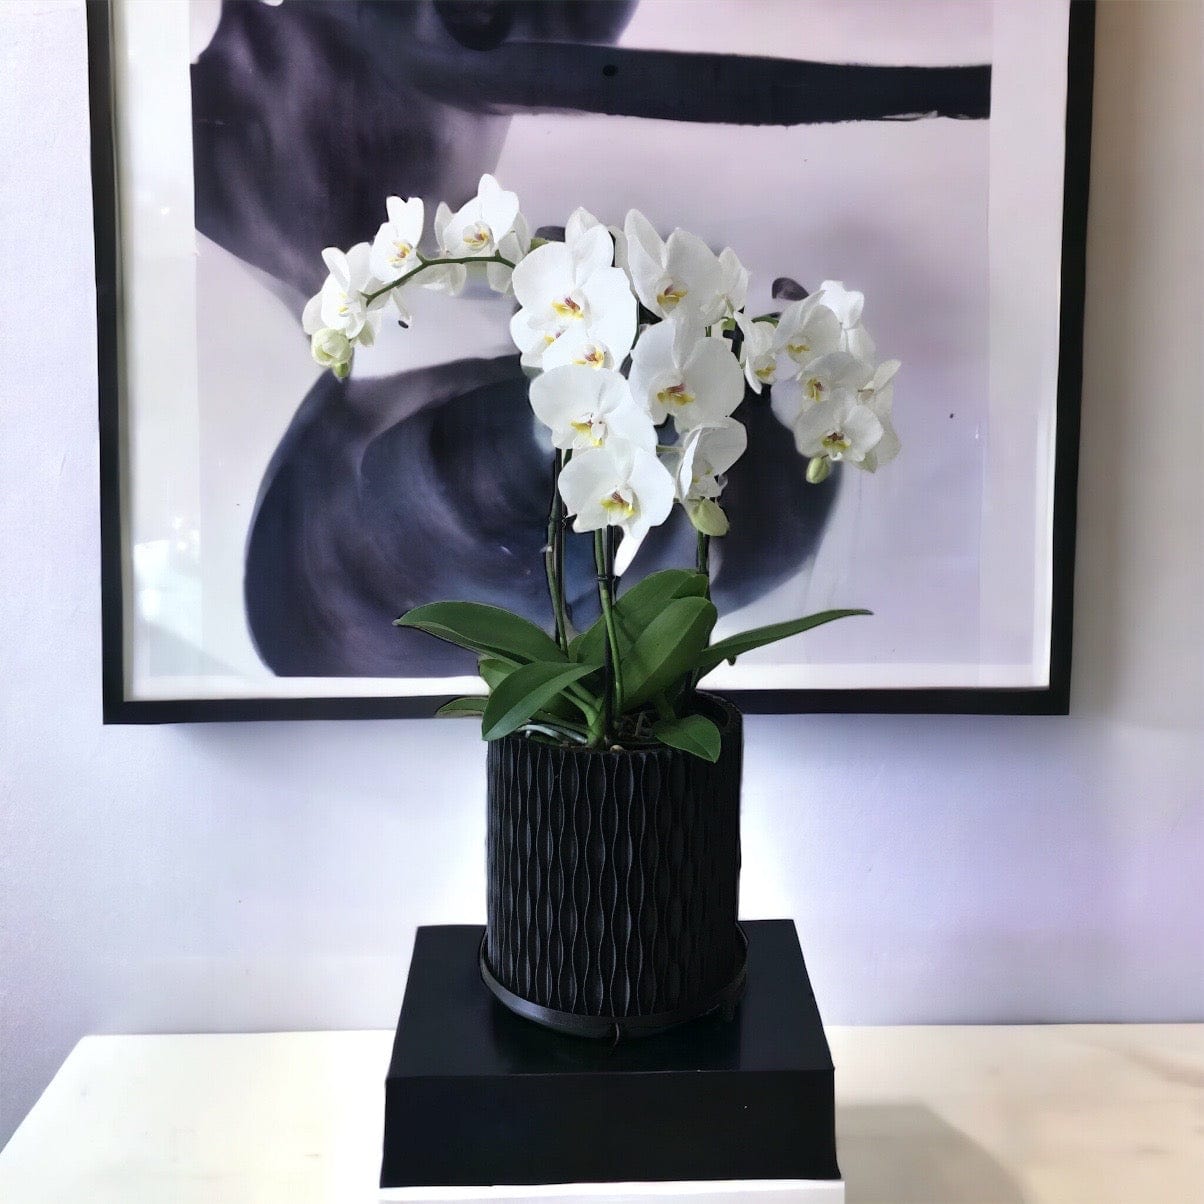 LOCALLY GROWN TRIPLE STEM WHITE PHALEONOPSIS ORCHID IN BLACK 3D PRINTED ECO PLANTER - 8" x 30"